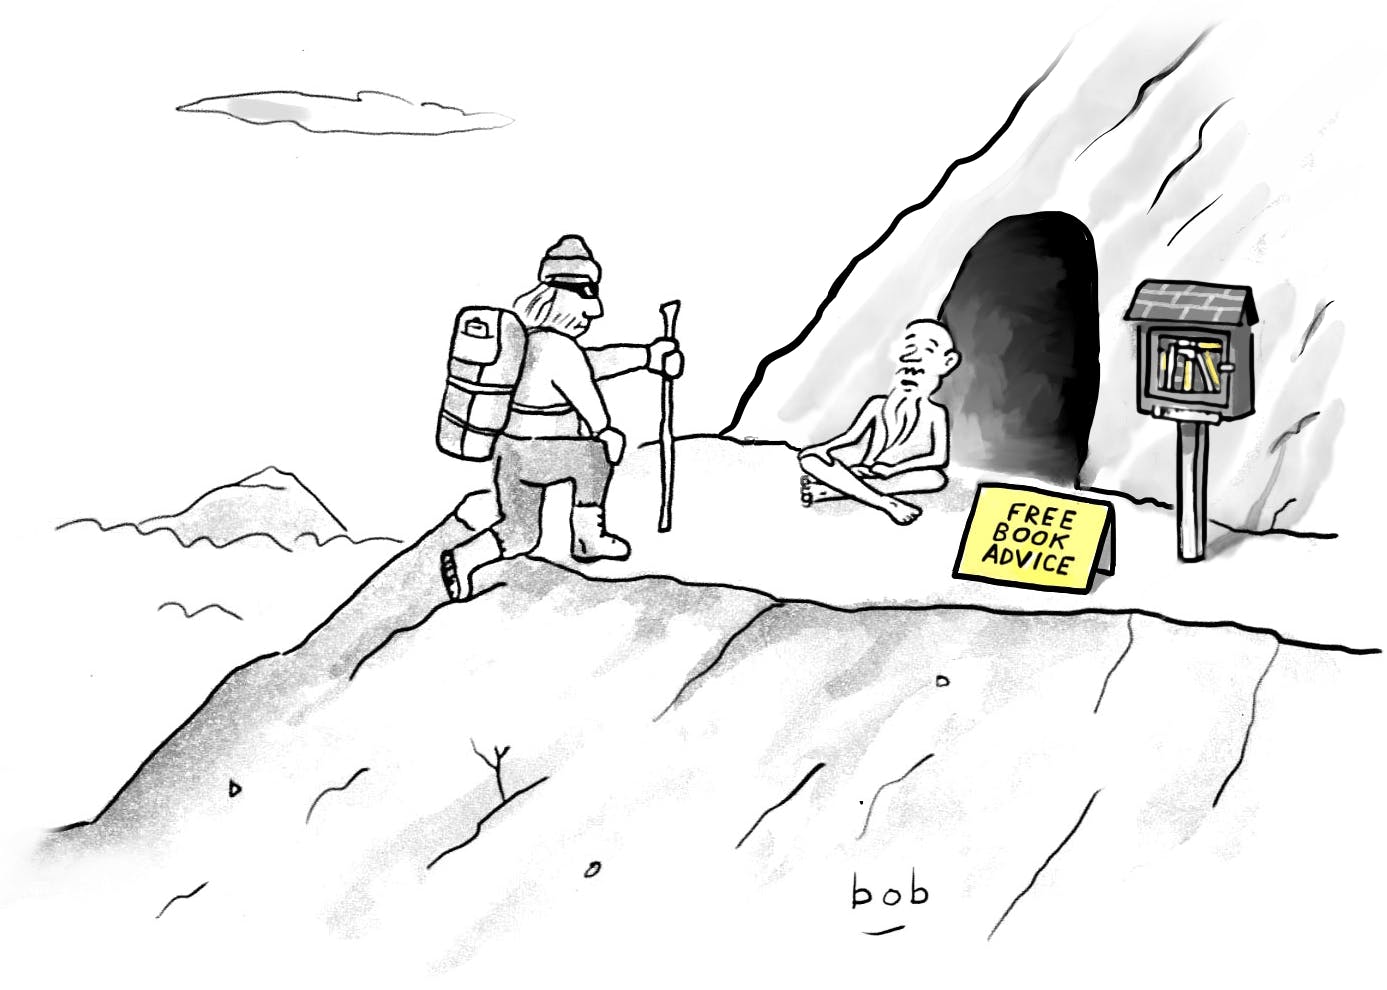 Cartoon by Bob Eckstein. A mountain climber kneels before a guru sitting cross-legged in front of a cave near a mountaintop. Nearby is a Little Free Library on a wooden stand, and on the ground is a sign reading “Free book advice”.